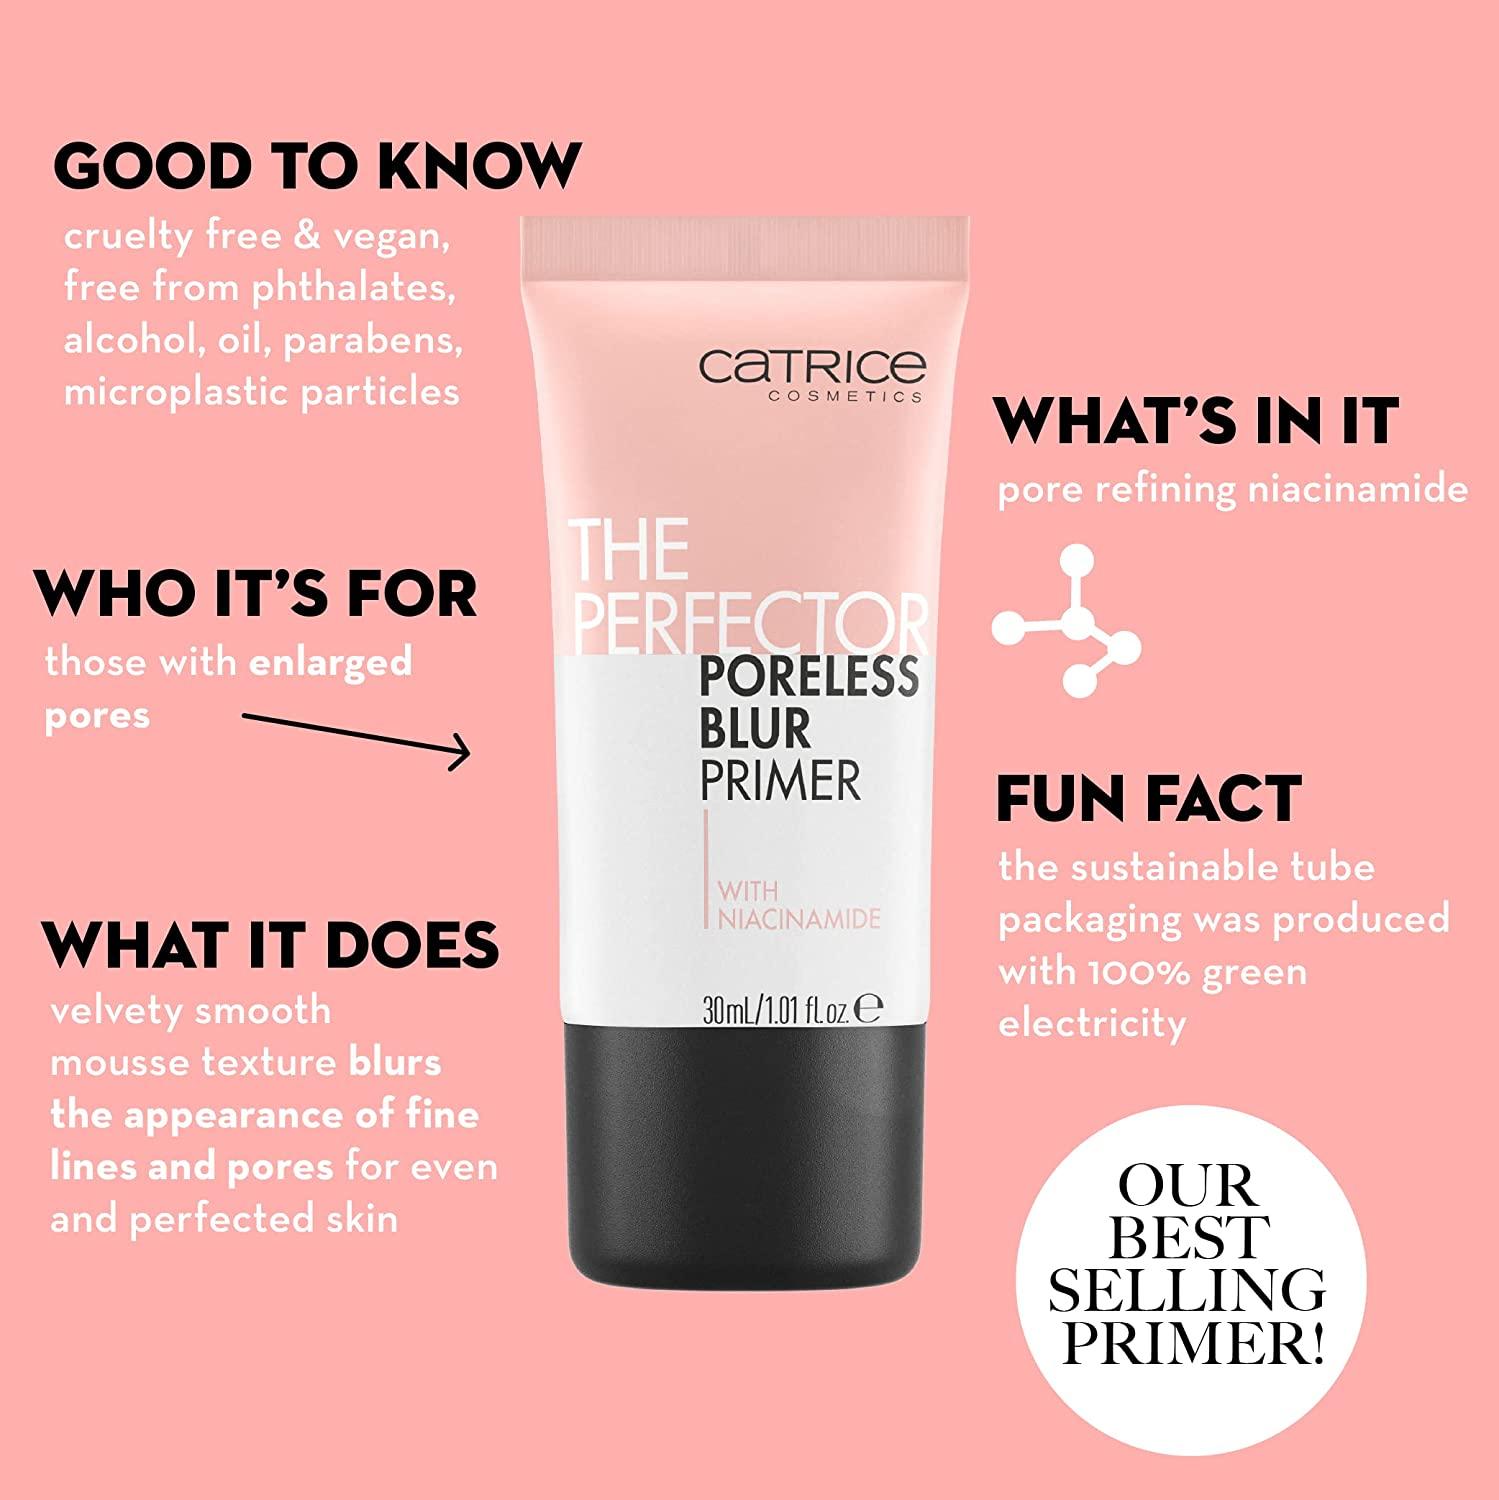 Catrice | The Free Refining Without Perfector Vegan Made Alcohol Parabens, | Fine Pore Make & | Oil, Poreless Gluten, Fragrance, & Niacinamide Up Primer Base with Cruelty & Blur | Phthalates, Line Microplastics